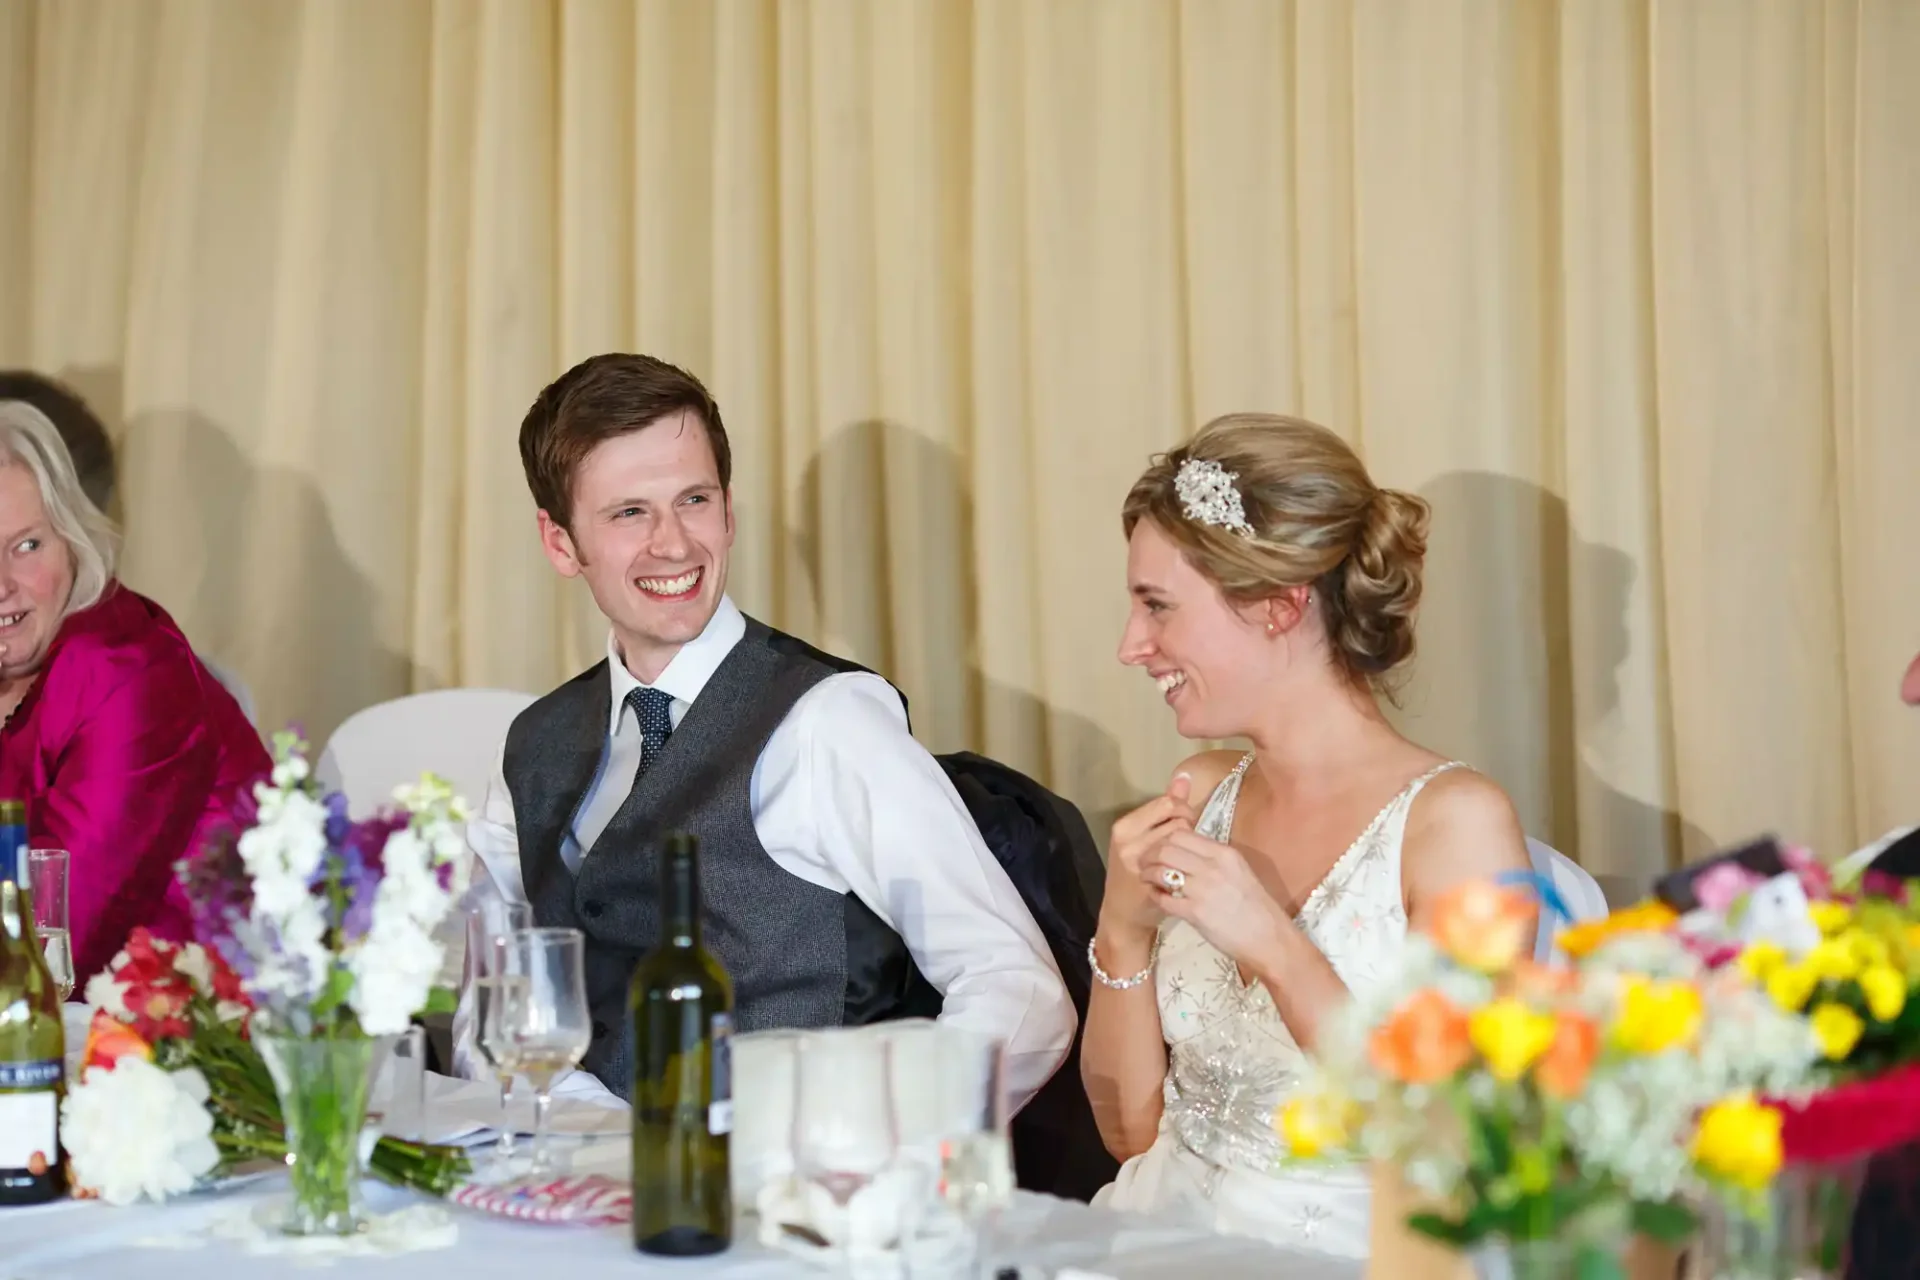 A bride and groom smiling and talking at a wedding reception table decorated with colorful flowers.